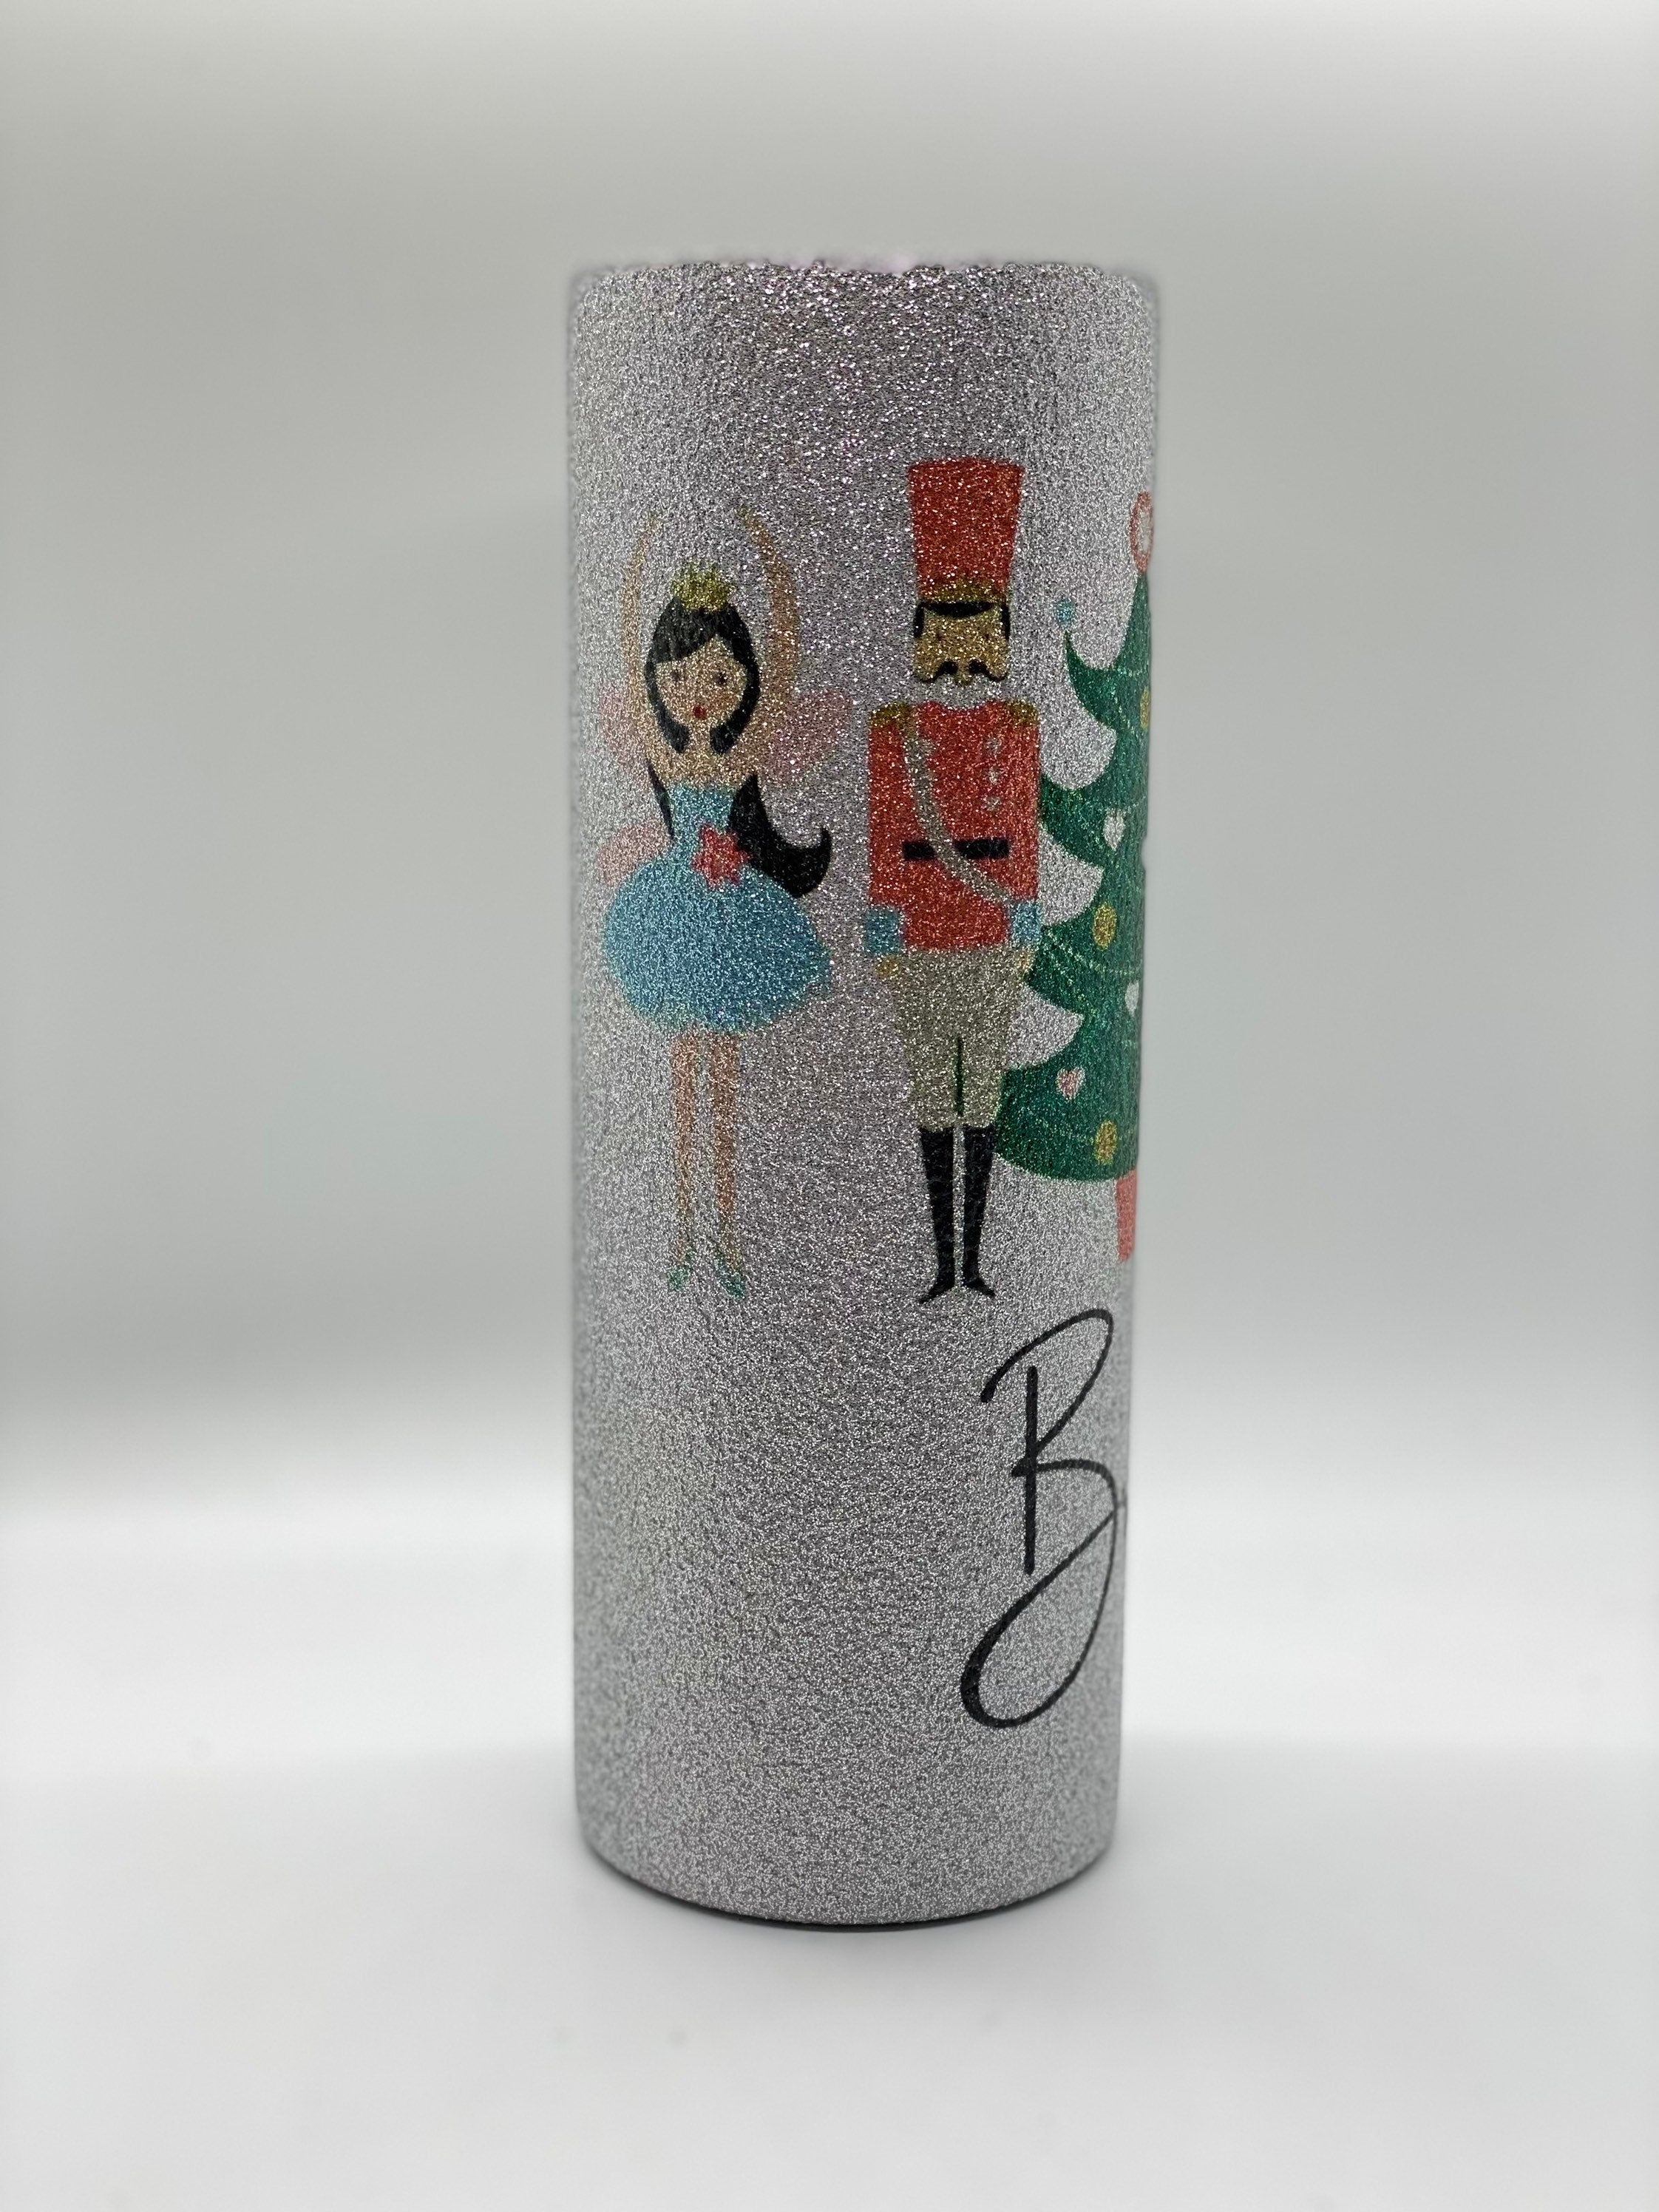  SunflowerVibe Dancing Tumbler, Personalized Ballet